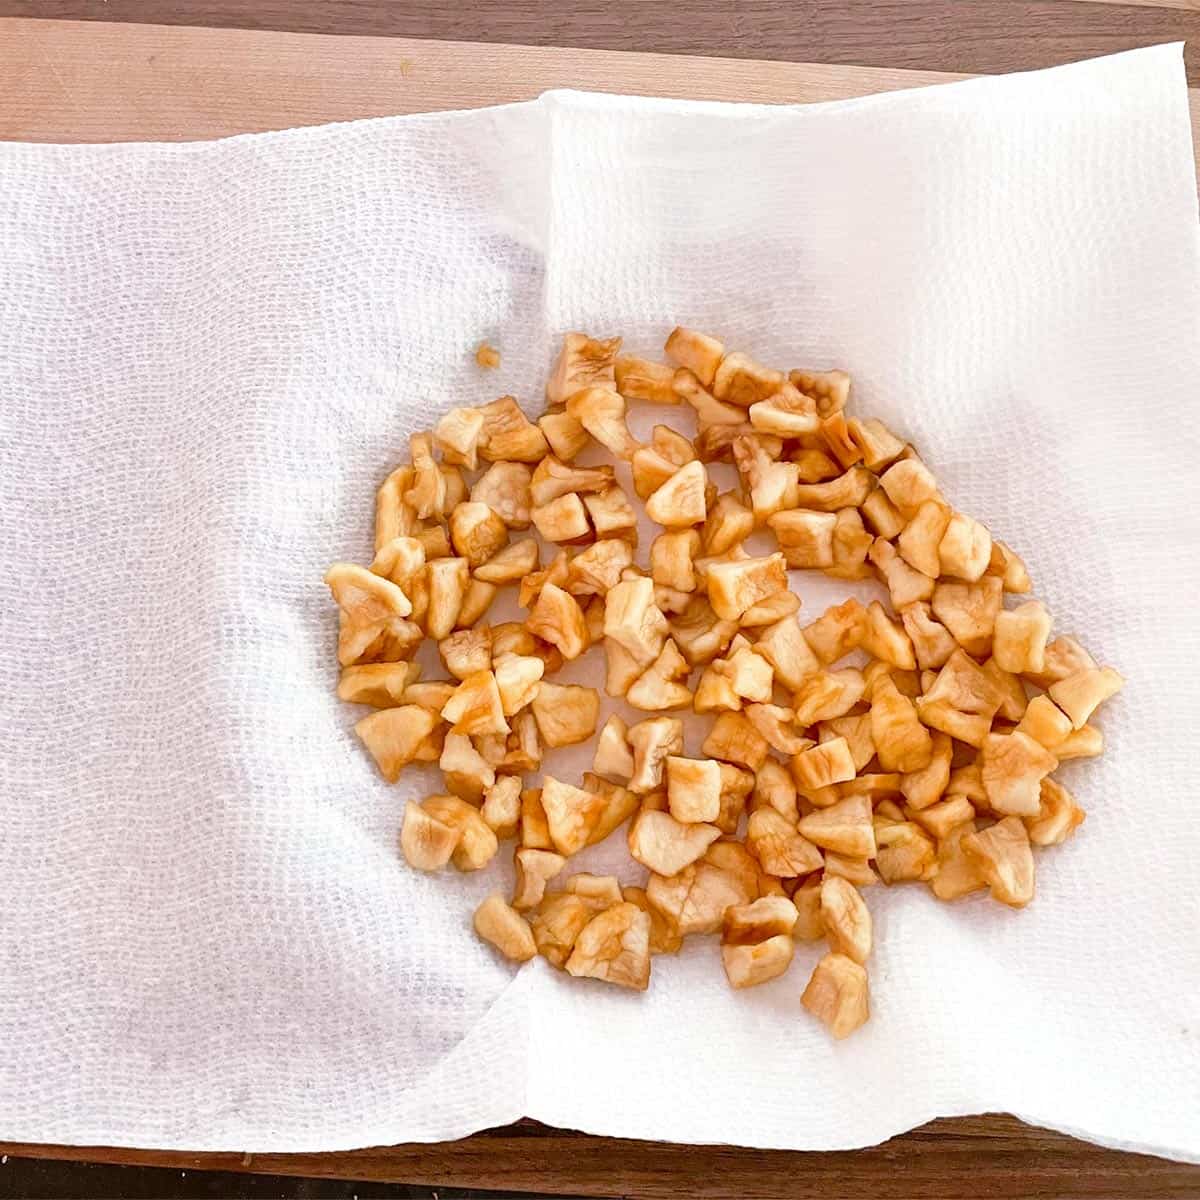 Infused dried apple pieces drained and drying on a paper towel.